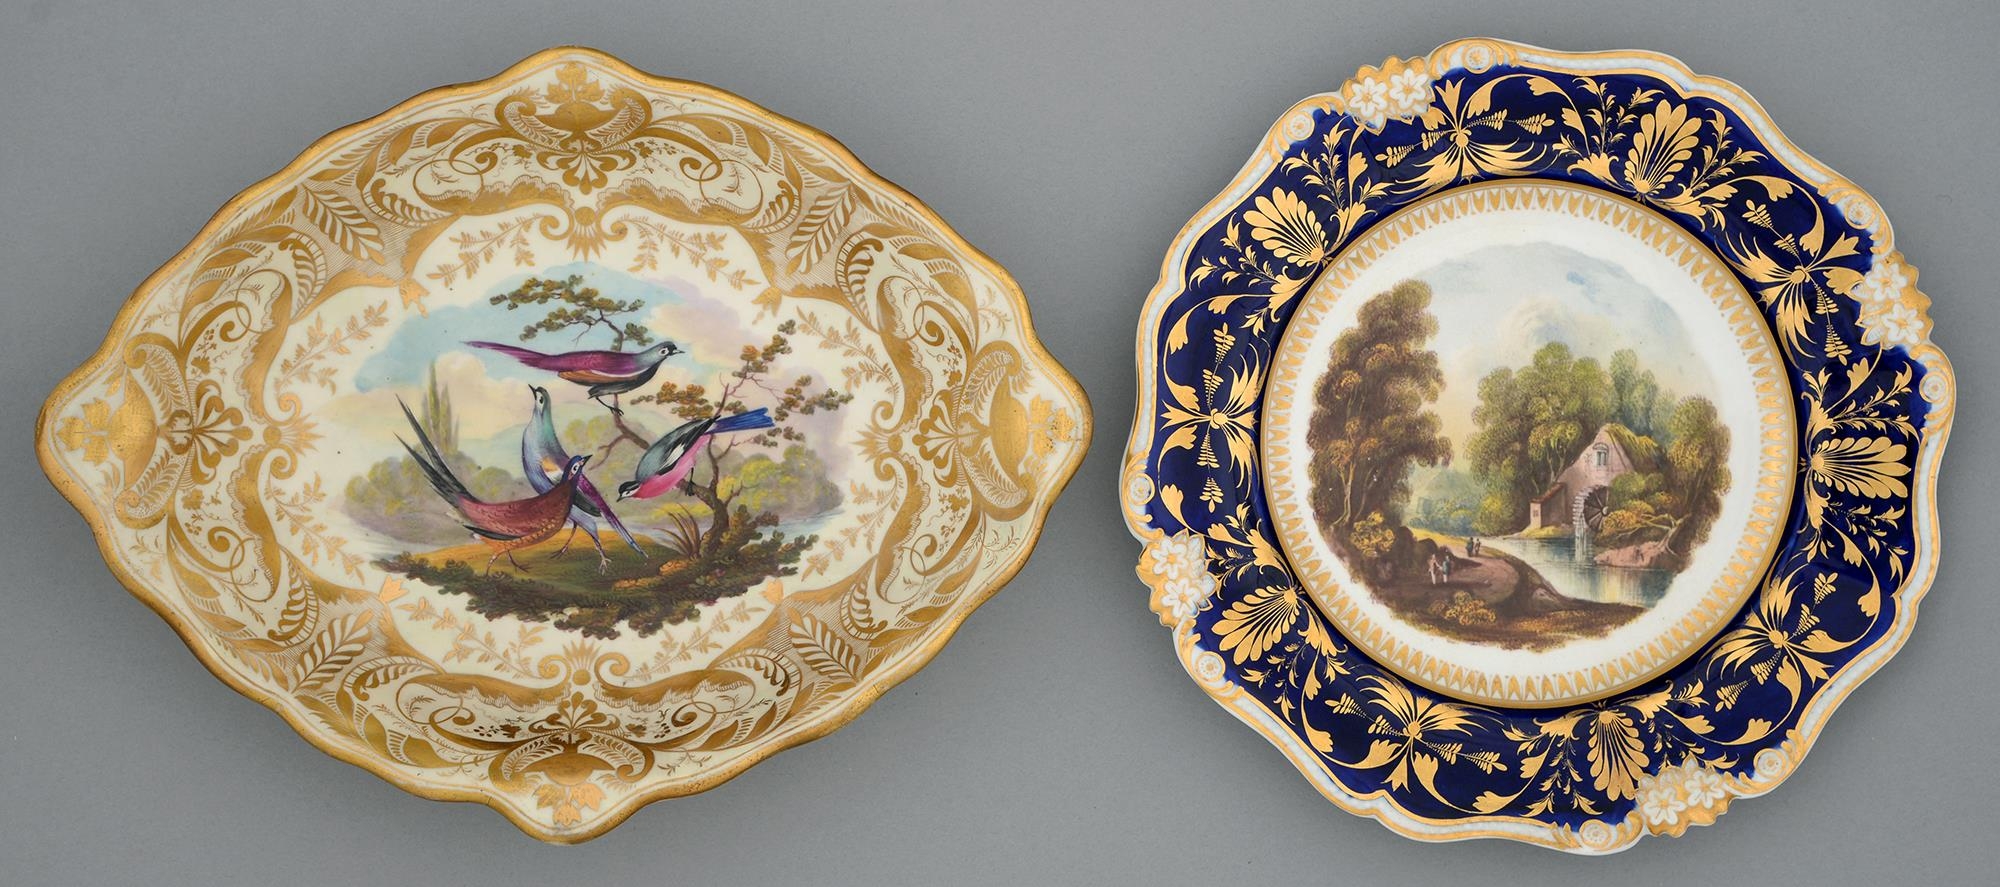 A Derby plate, c1830, painted by Daniel Lucas with a watermill, in blue and gilt border, 22.5cm